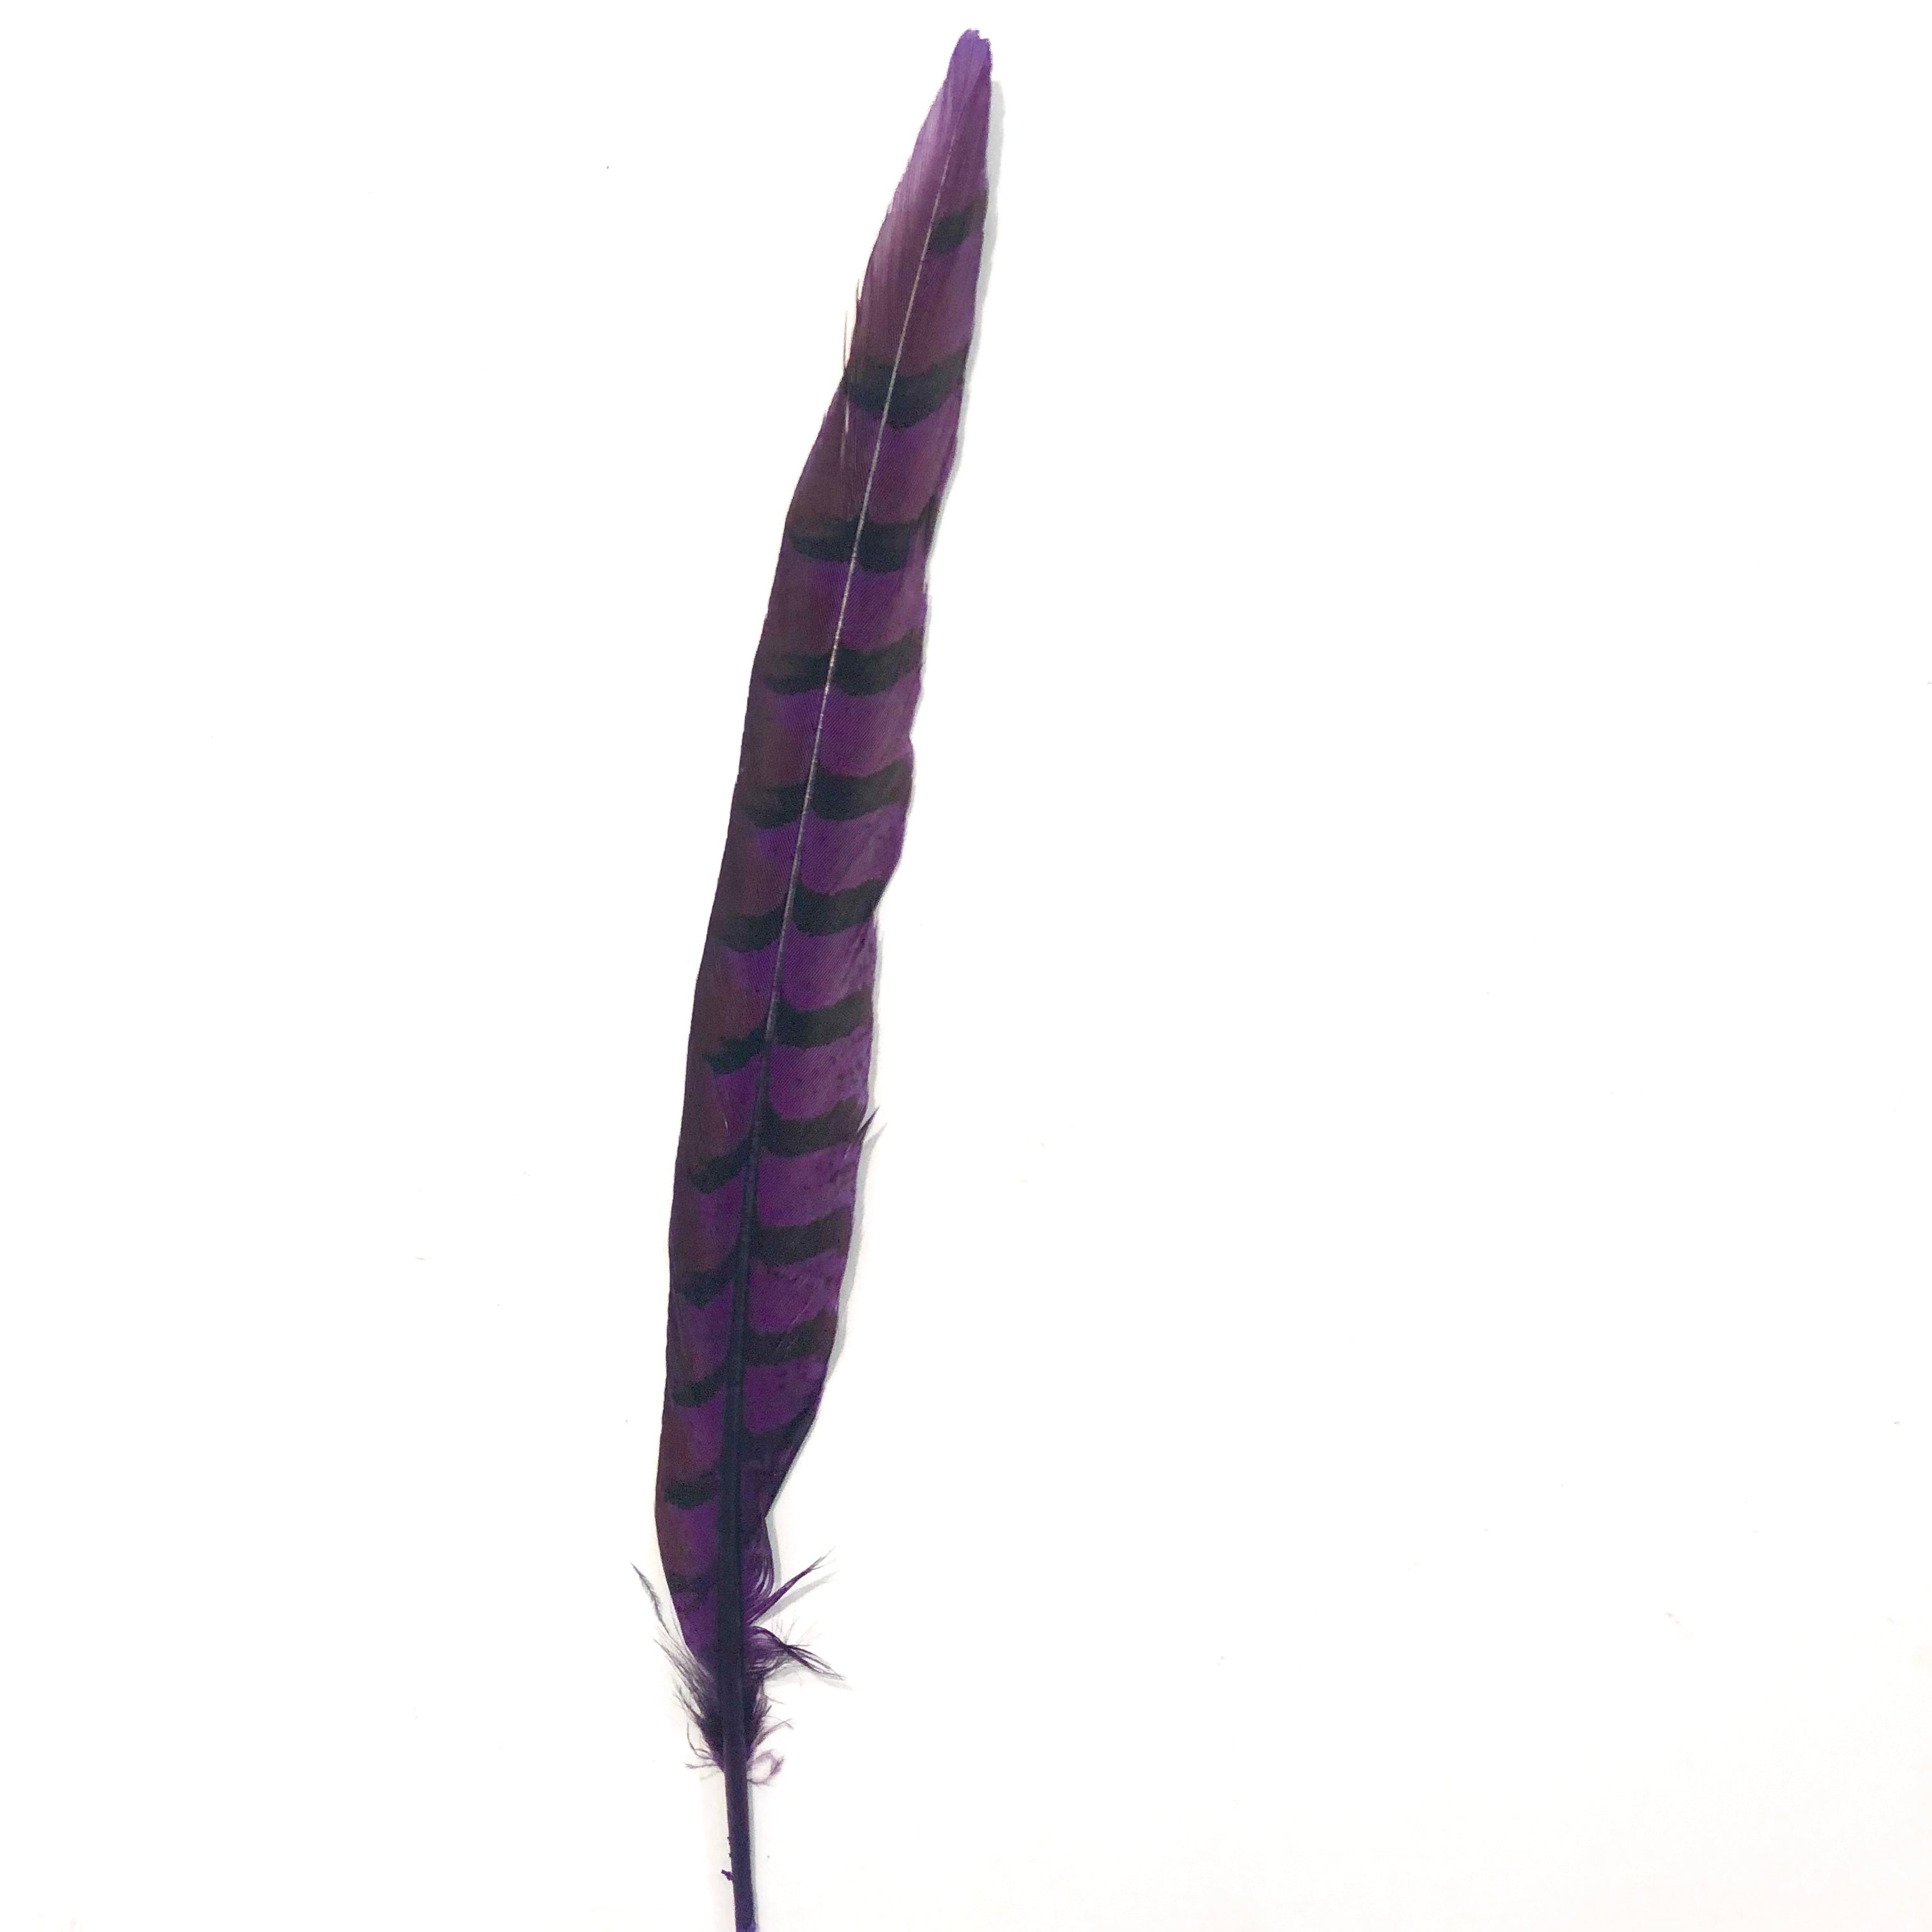 12" to 14" Reeves Pheasant Tail Feather - Eggplant ((SECONDS))